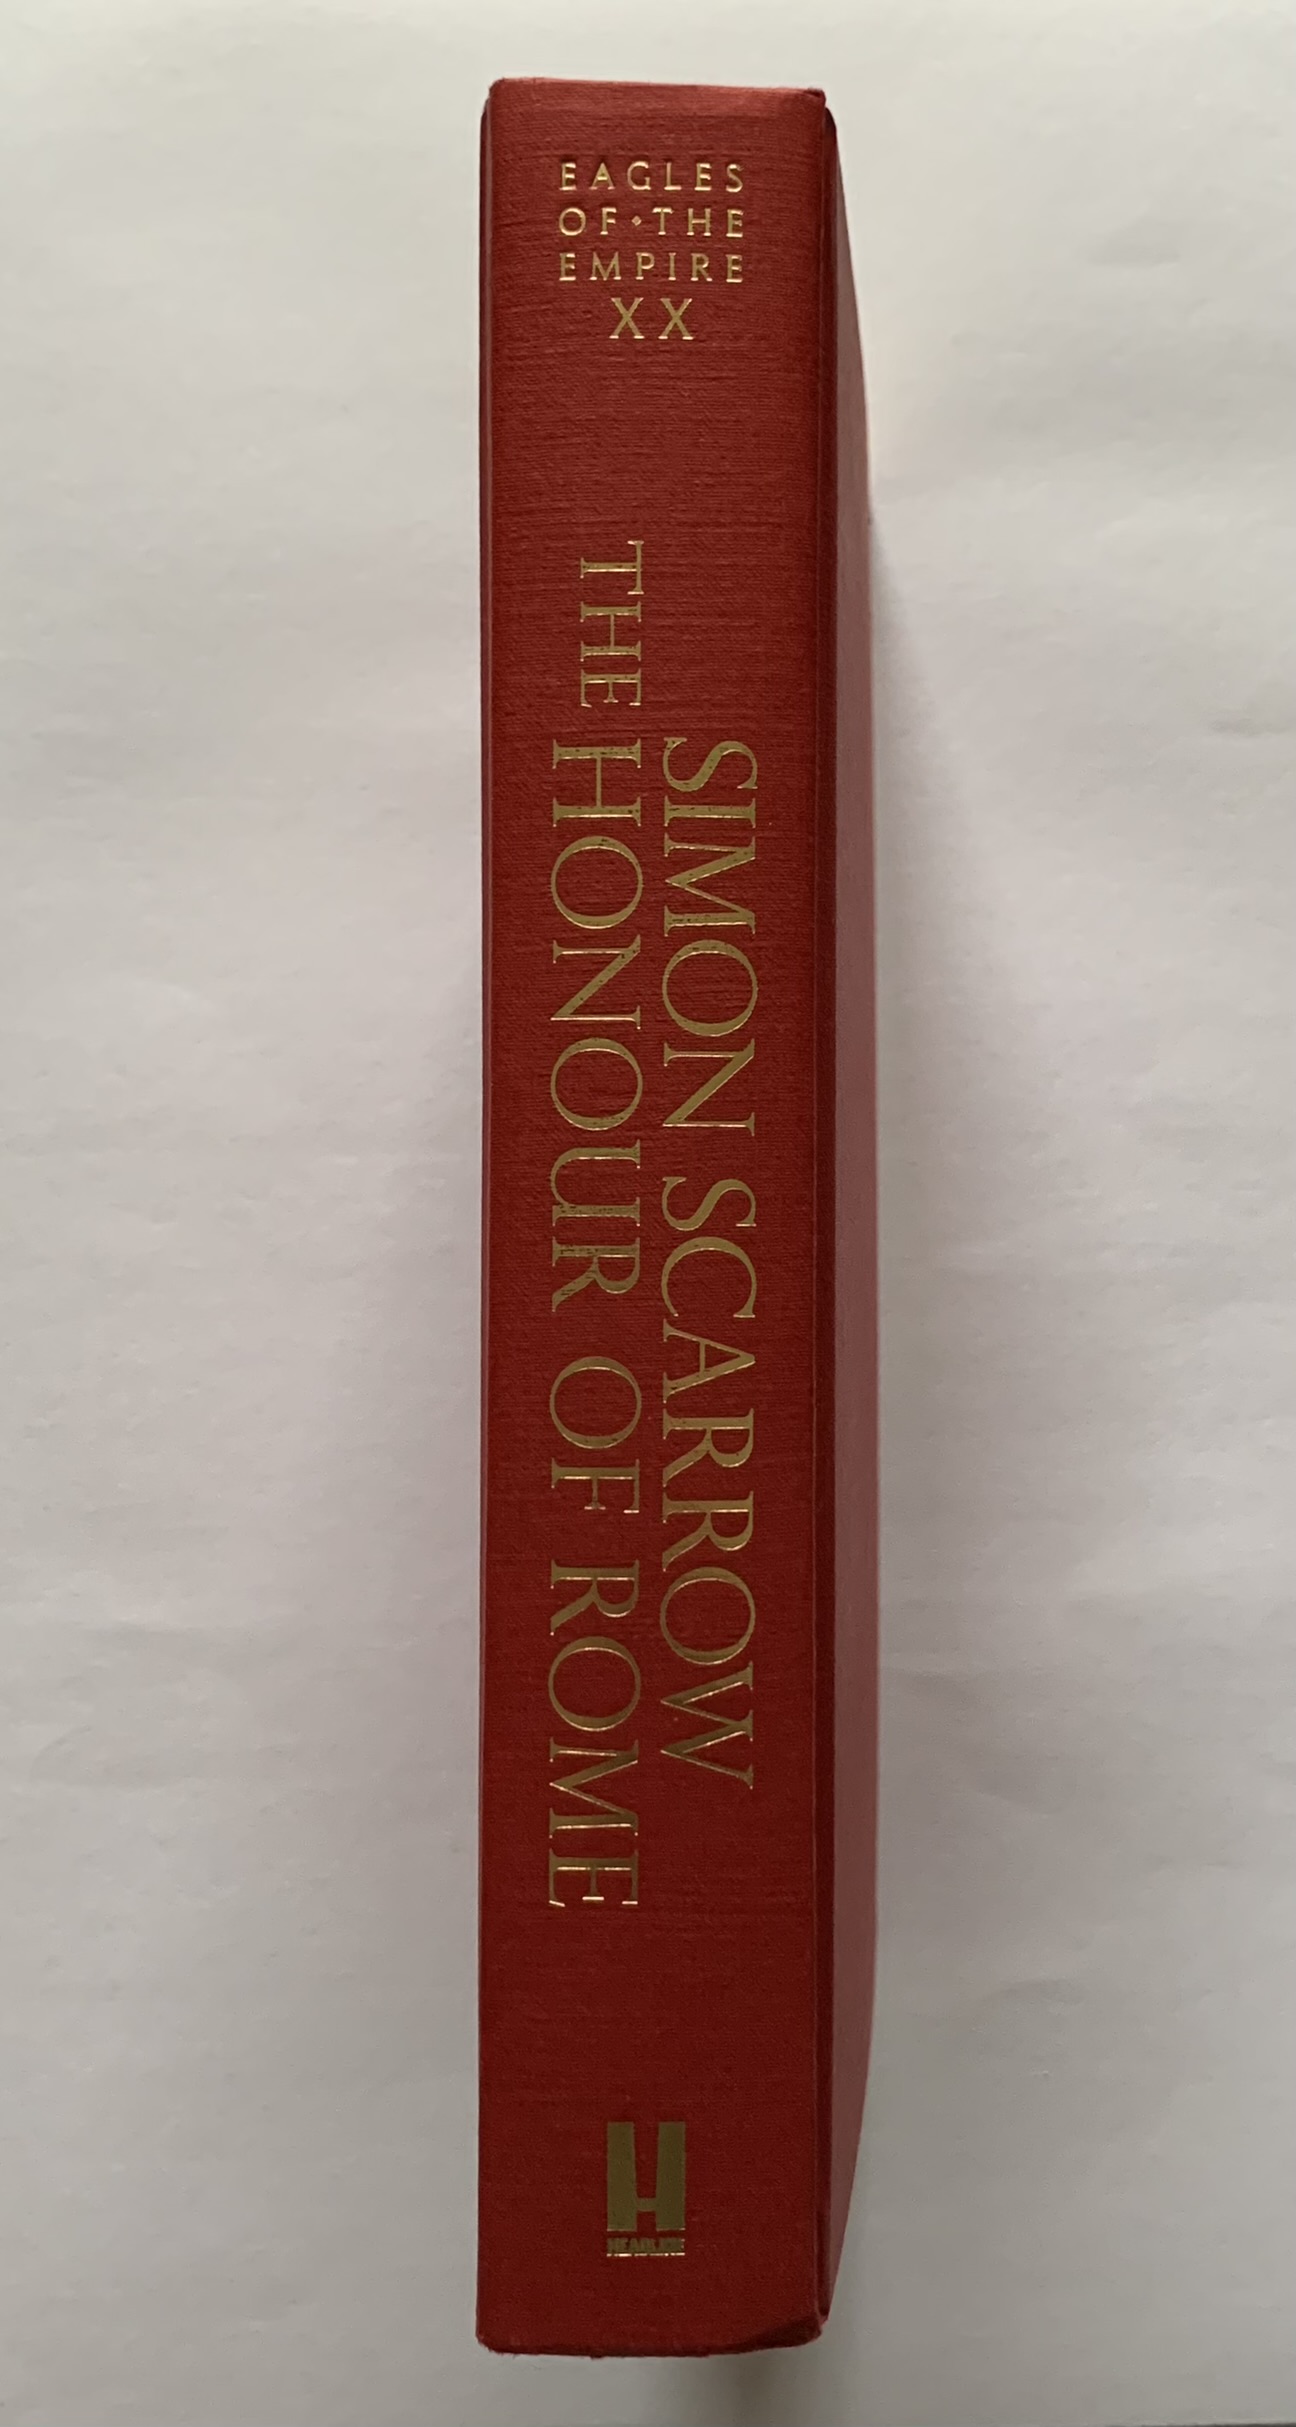 The Honour of Rome - by Simon Scarrow (Hardcover)